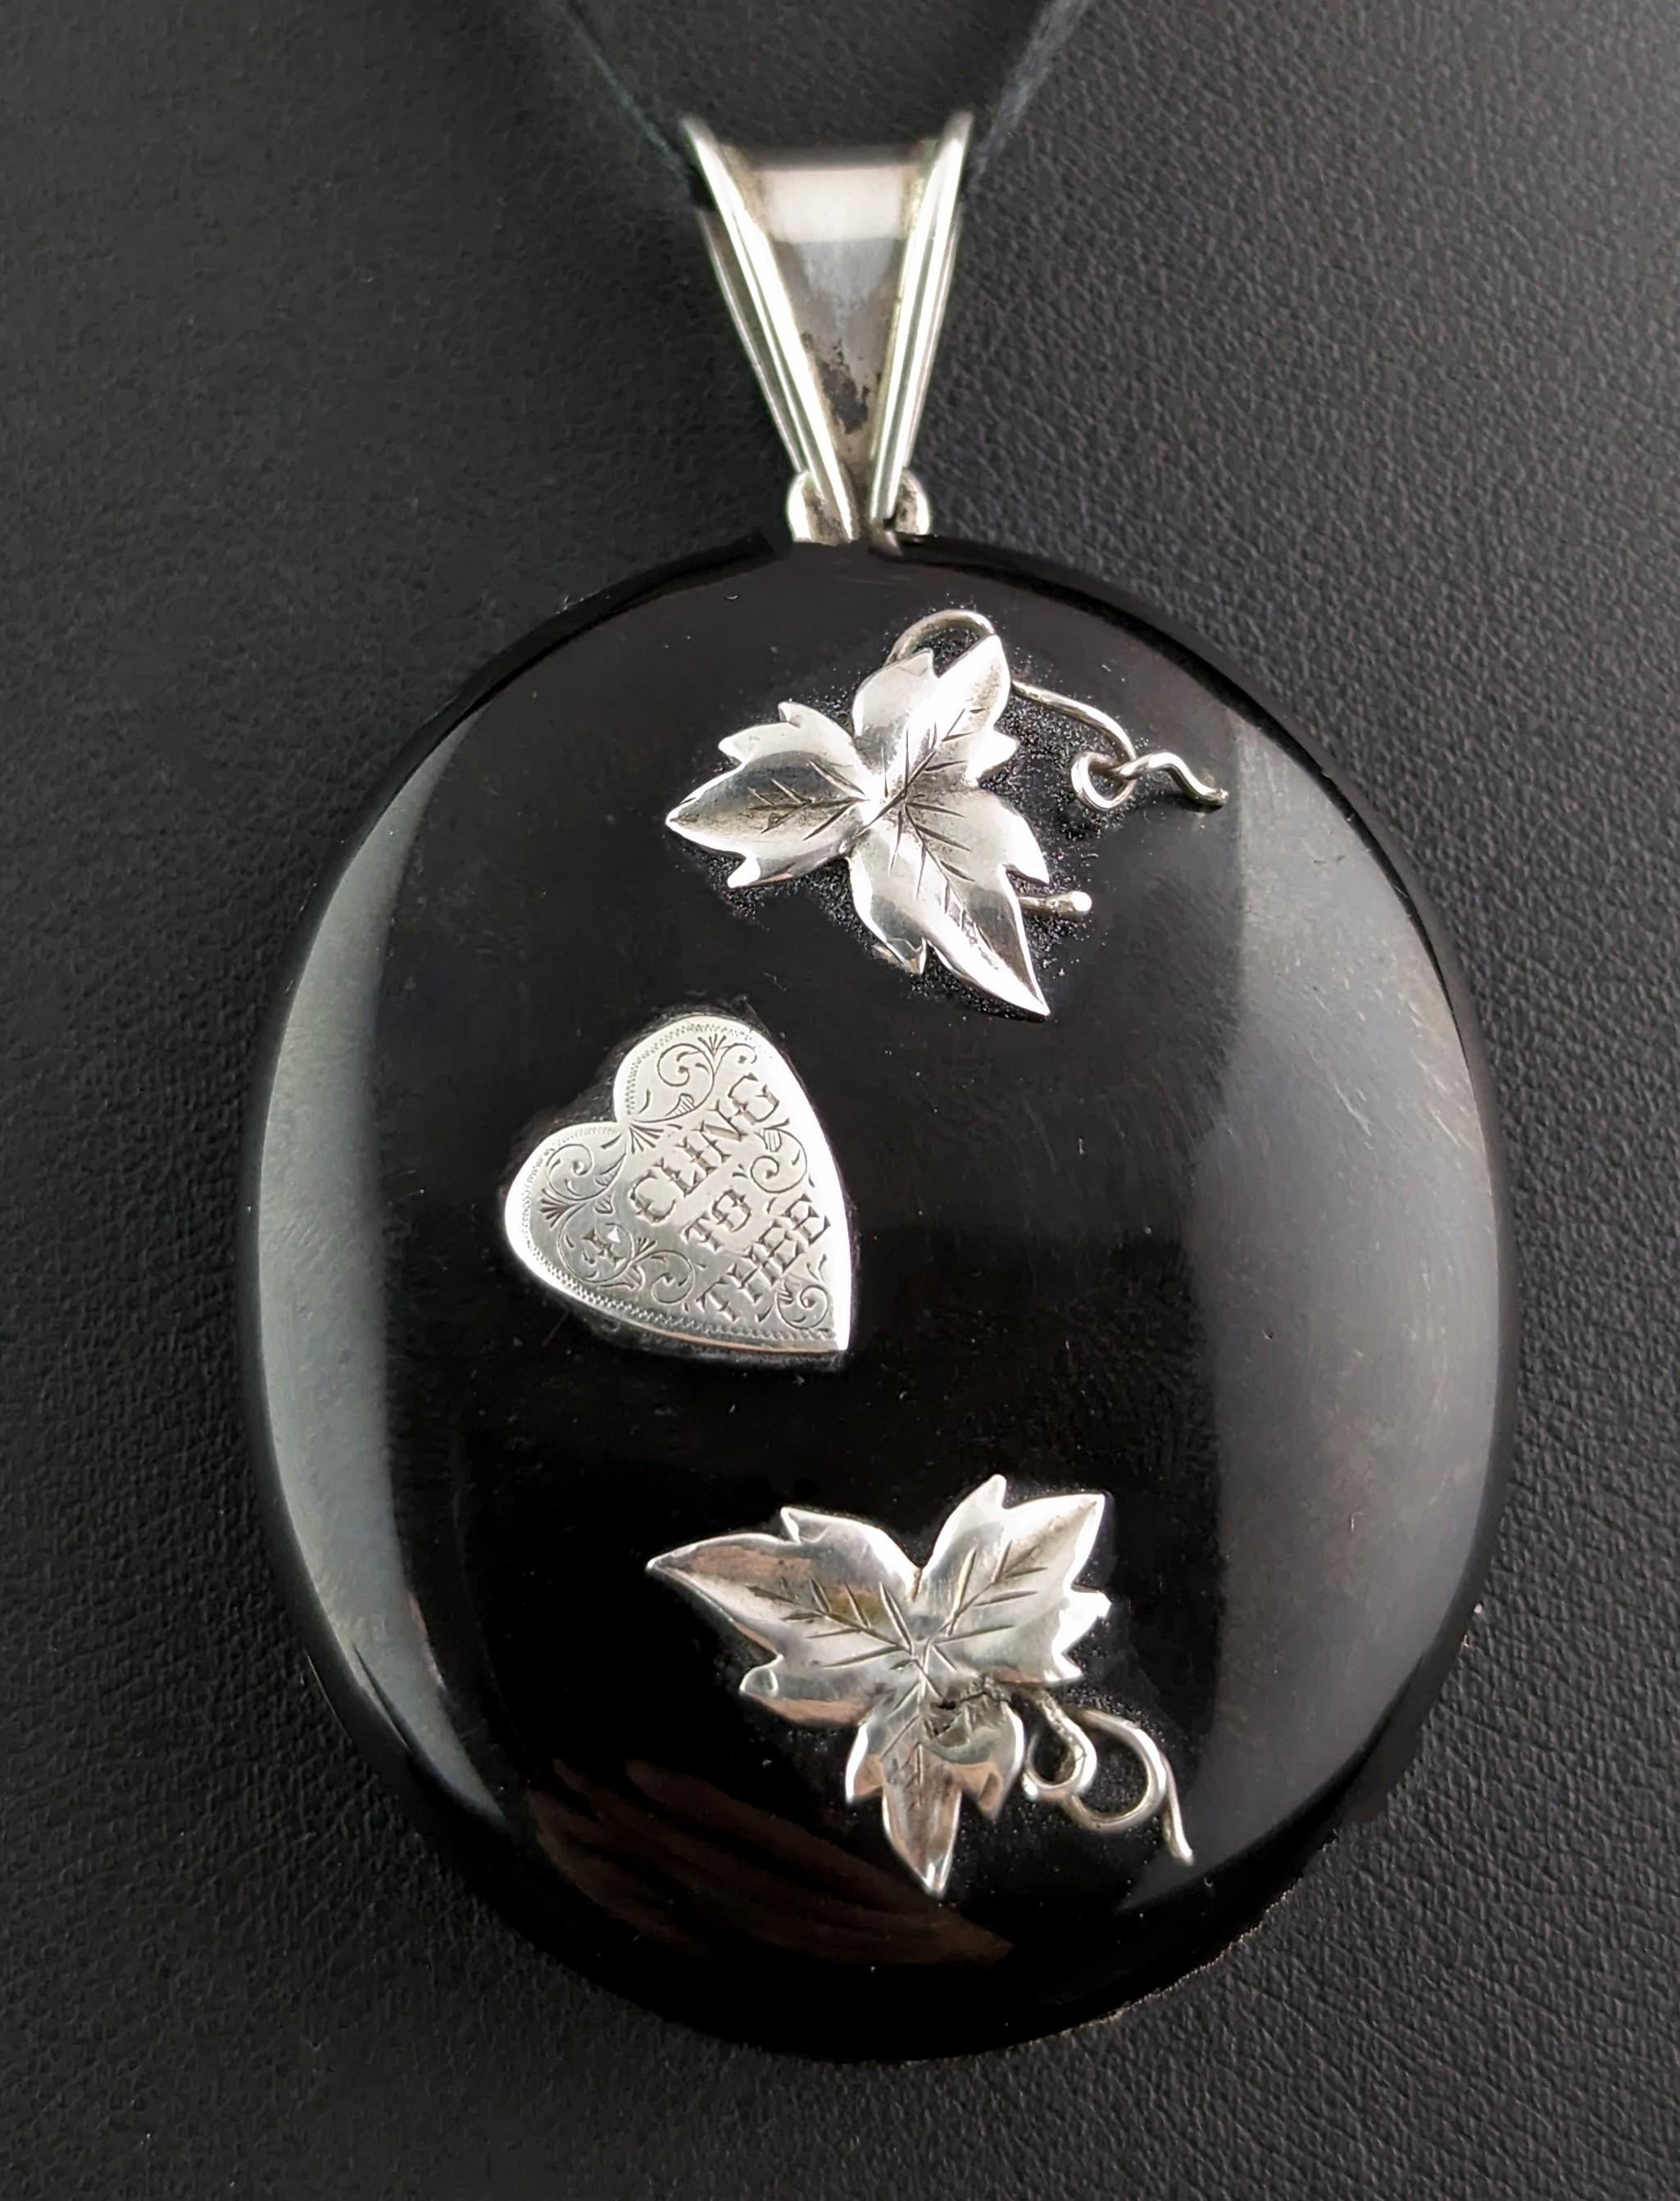 This antique Victorian Whitby Jet and sterling silver locket is truly unique and incredibly beautiful.

This locket is an oval shape with a smooth polished jet front and back, mounted on a silver frame, the front has applied silver detailing of two